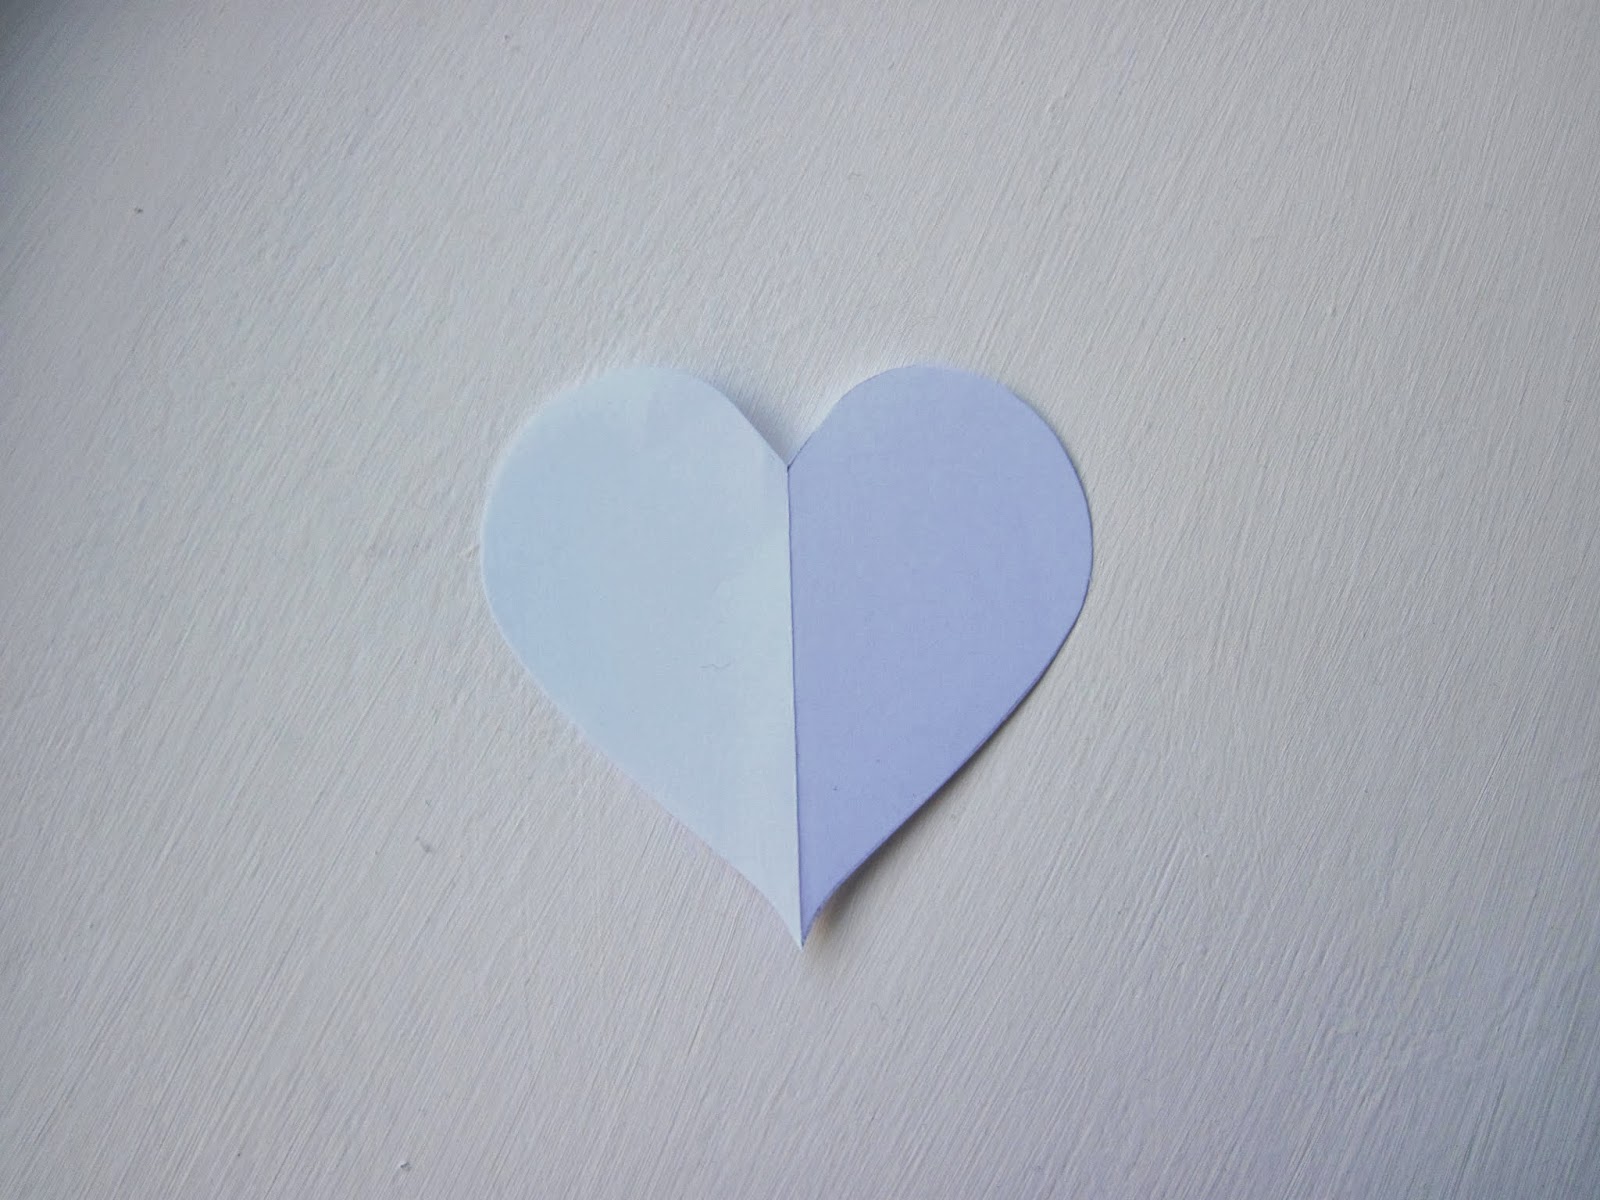 How To Make Perfect Heart Shape With Paper, How To Cut Heart Shape On  Paper